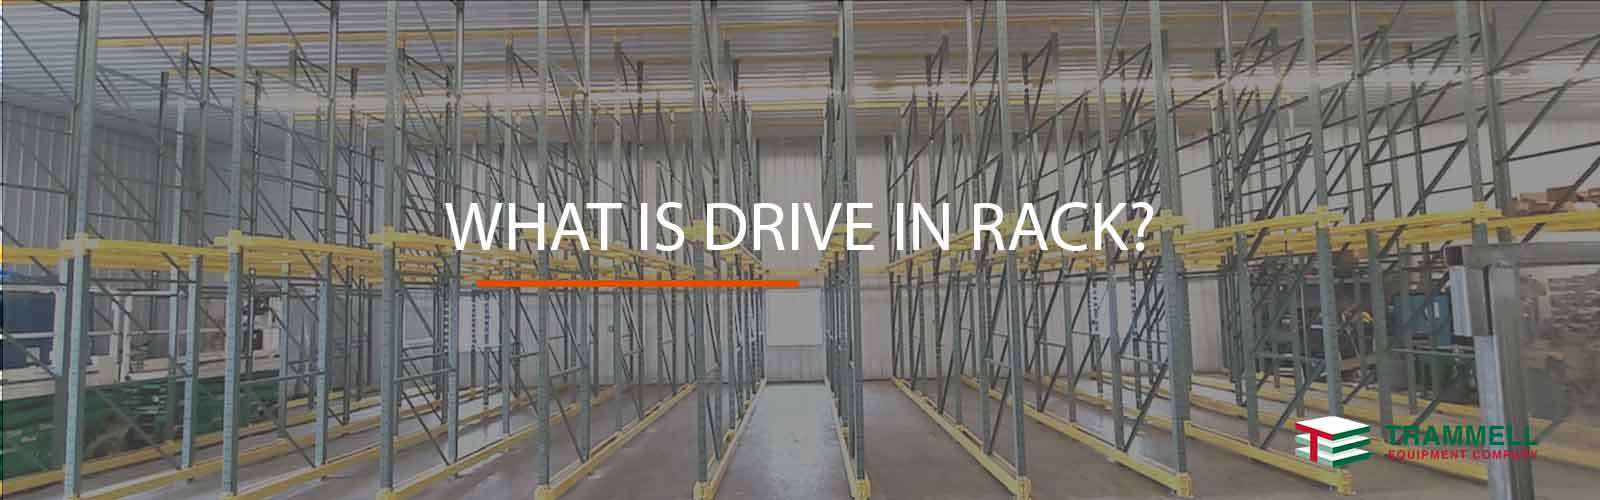 What is Drive in Rack?